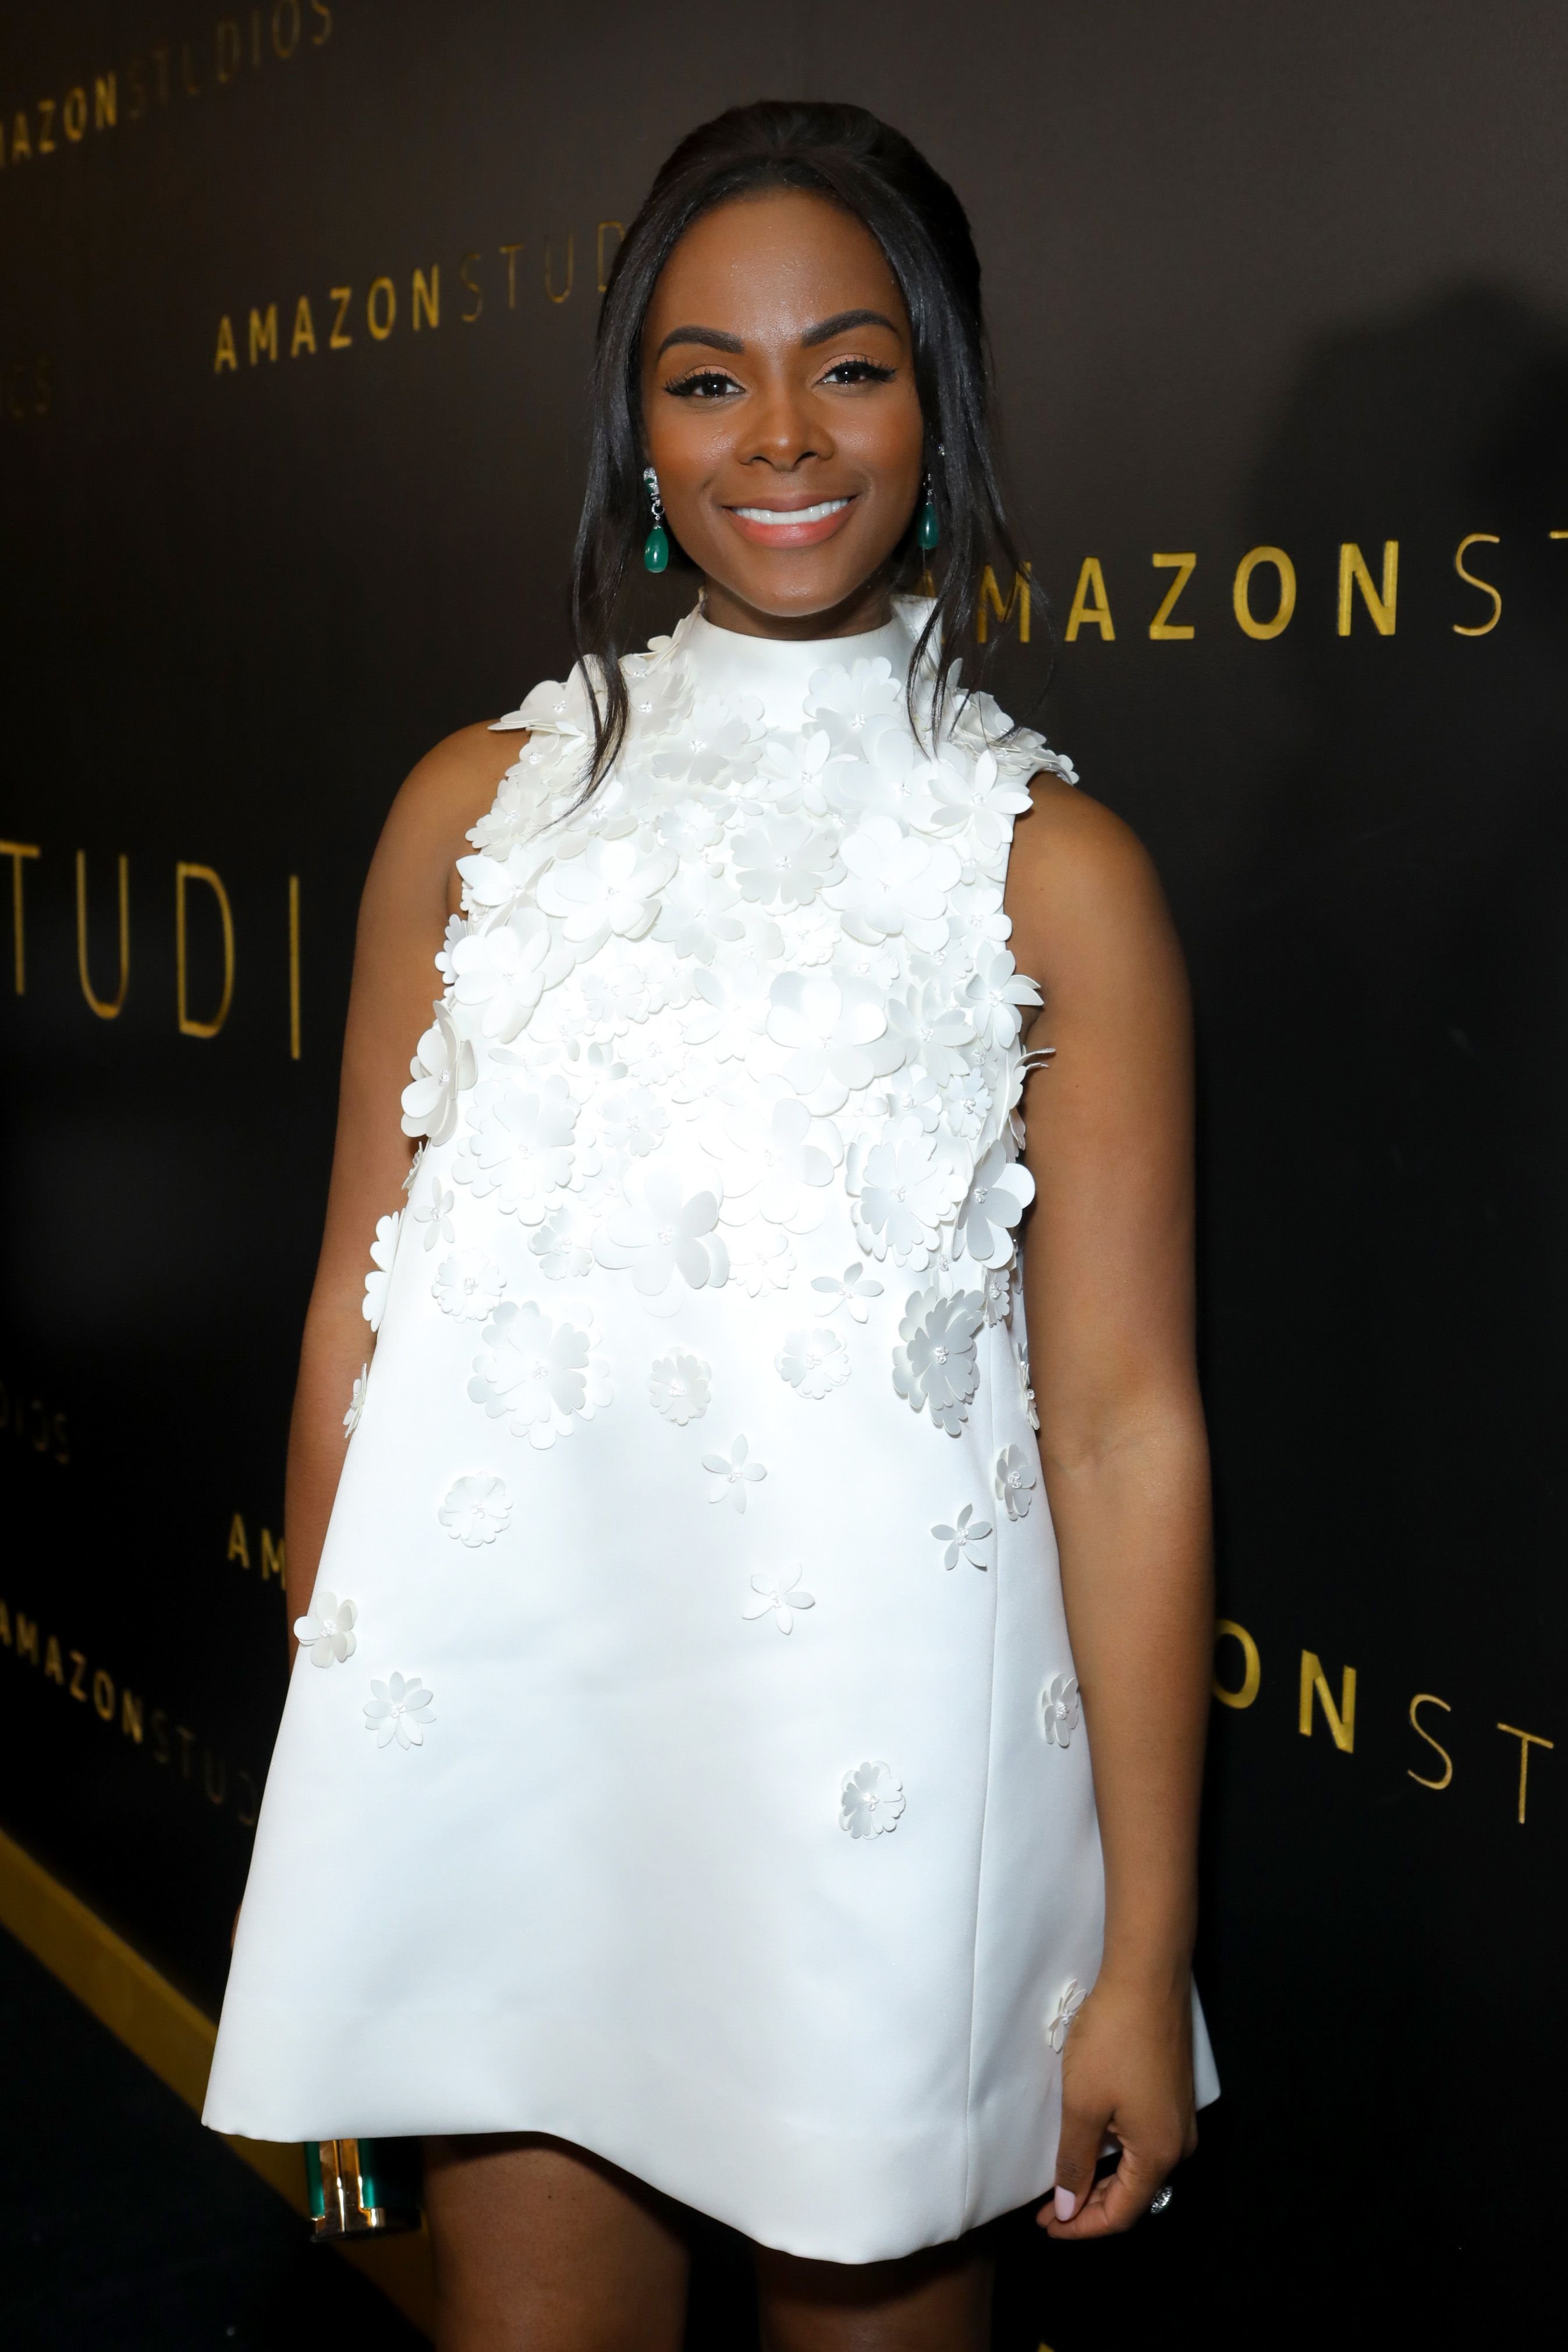 Actress Tika Sumpter attending the Golden Globes After Party on Jan. 5, 2020 in California | Photo: Getty Images